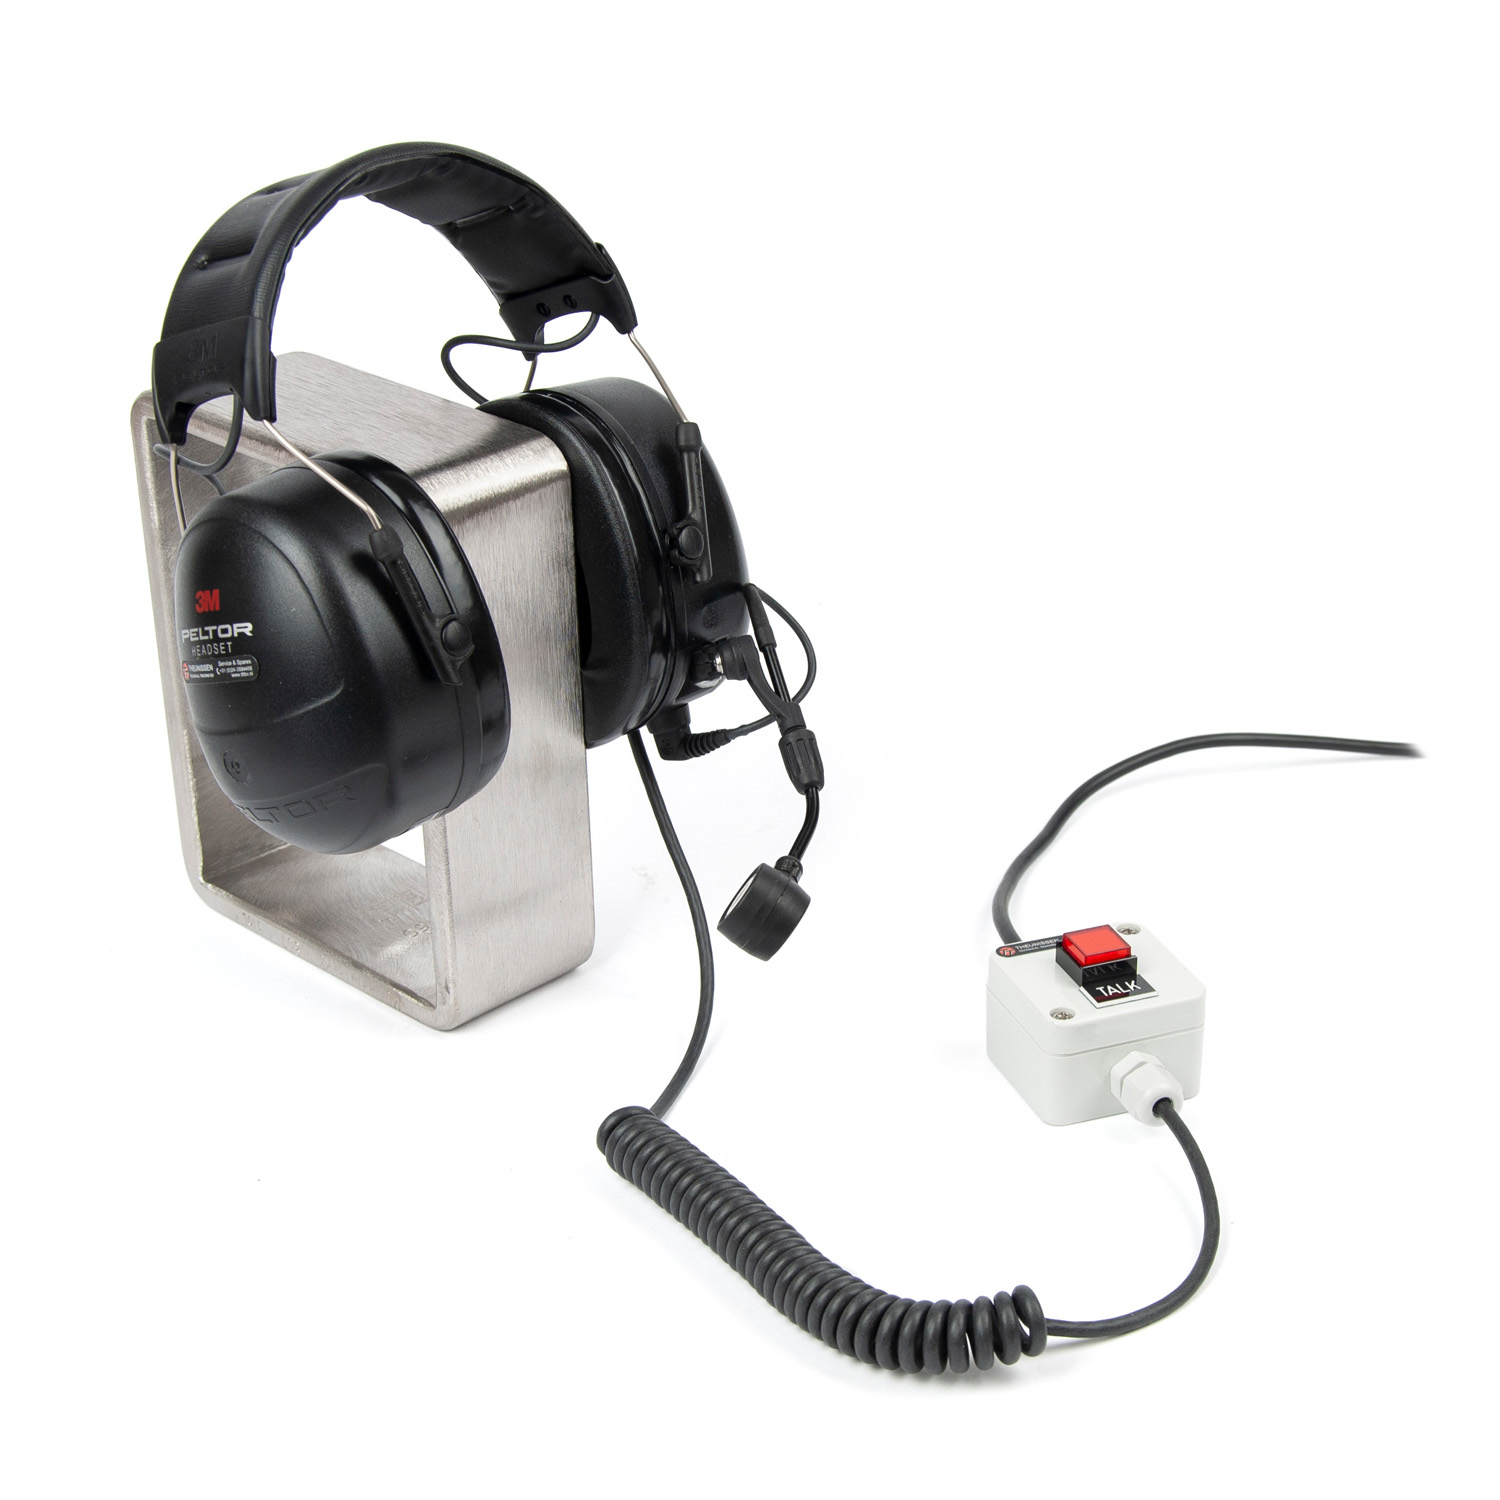 STC-604V2 Headset with 10 mtr. cable for STC-303